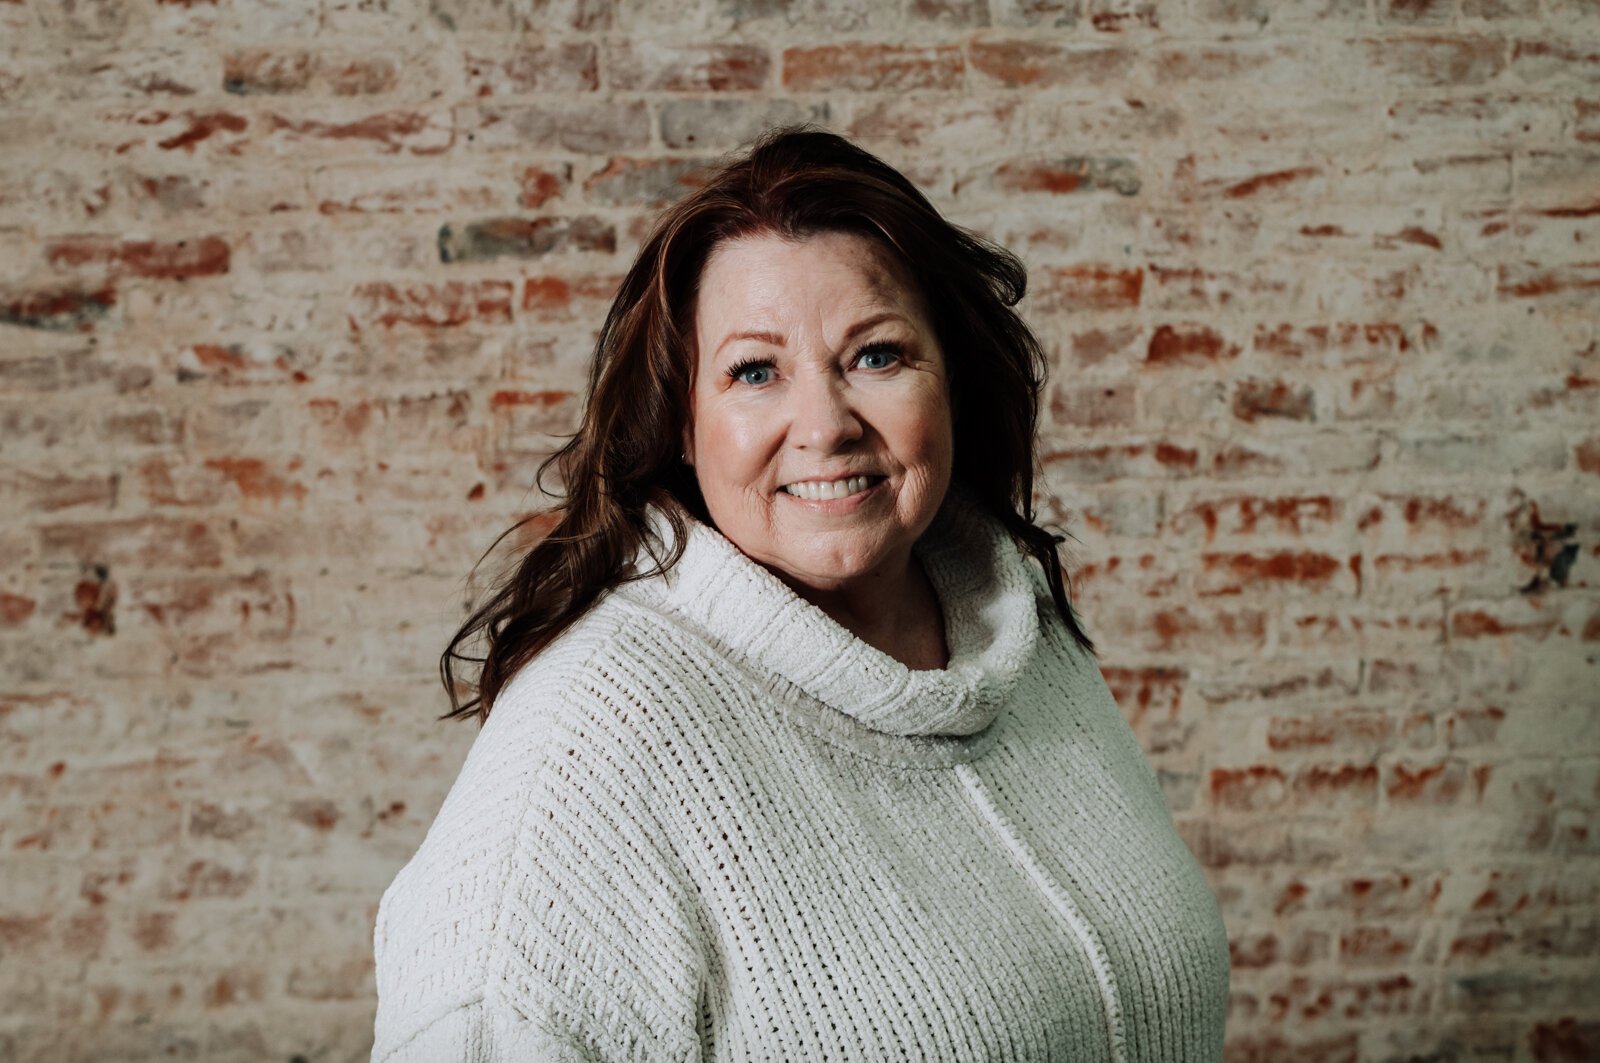 Headshot of Julie Dickey, owner, at the future location of 4Partners in Crime, Inc. an art space for food & spirit at 14 W Canal St. Wabash, IN on January 15, 2022.